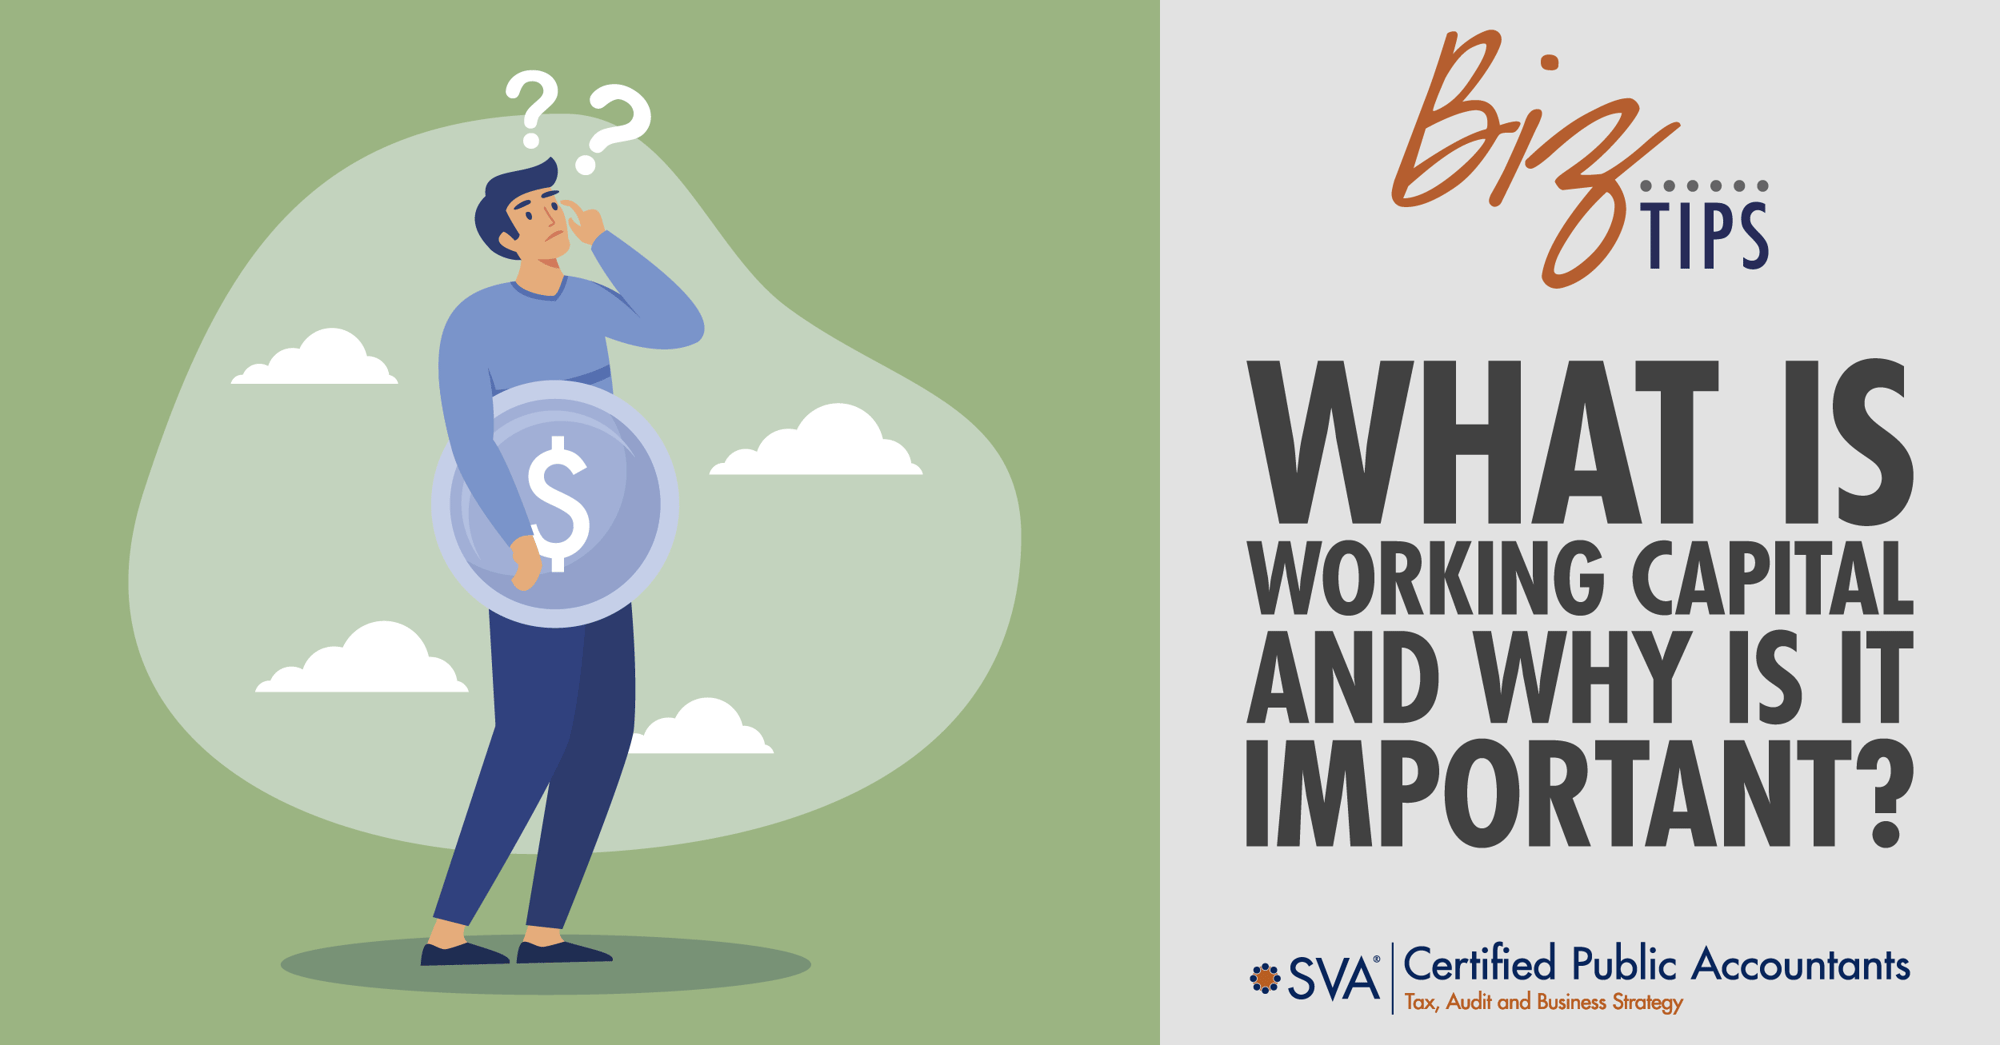 sva-certified-public-accountants-biz-tips-what-is-working-capital-and-why-is-it-important-03